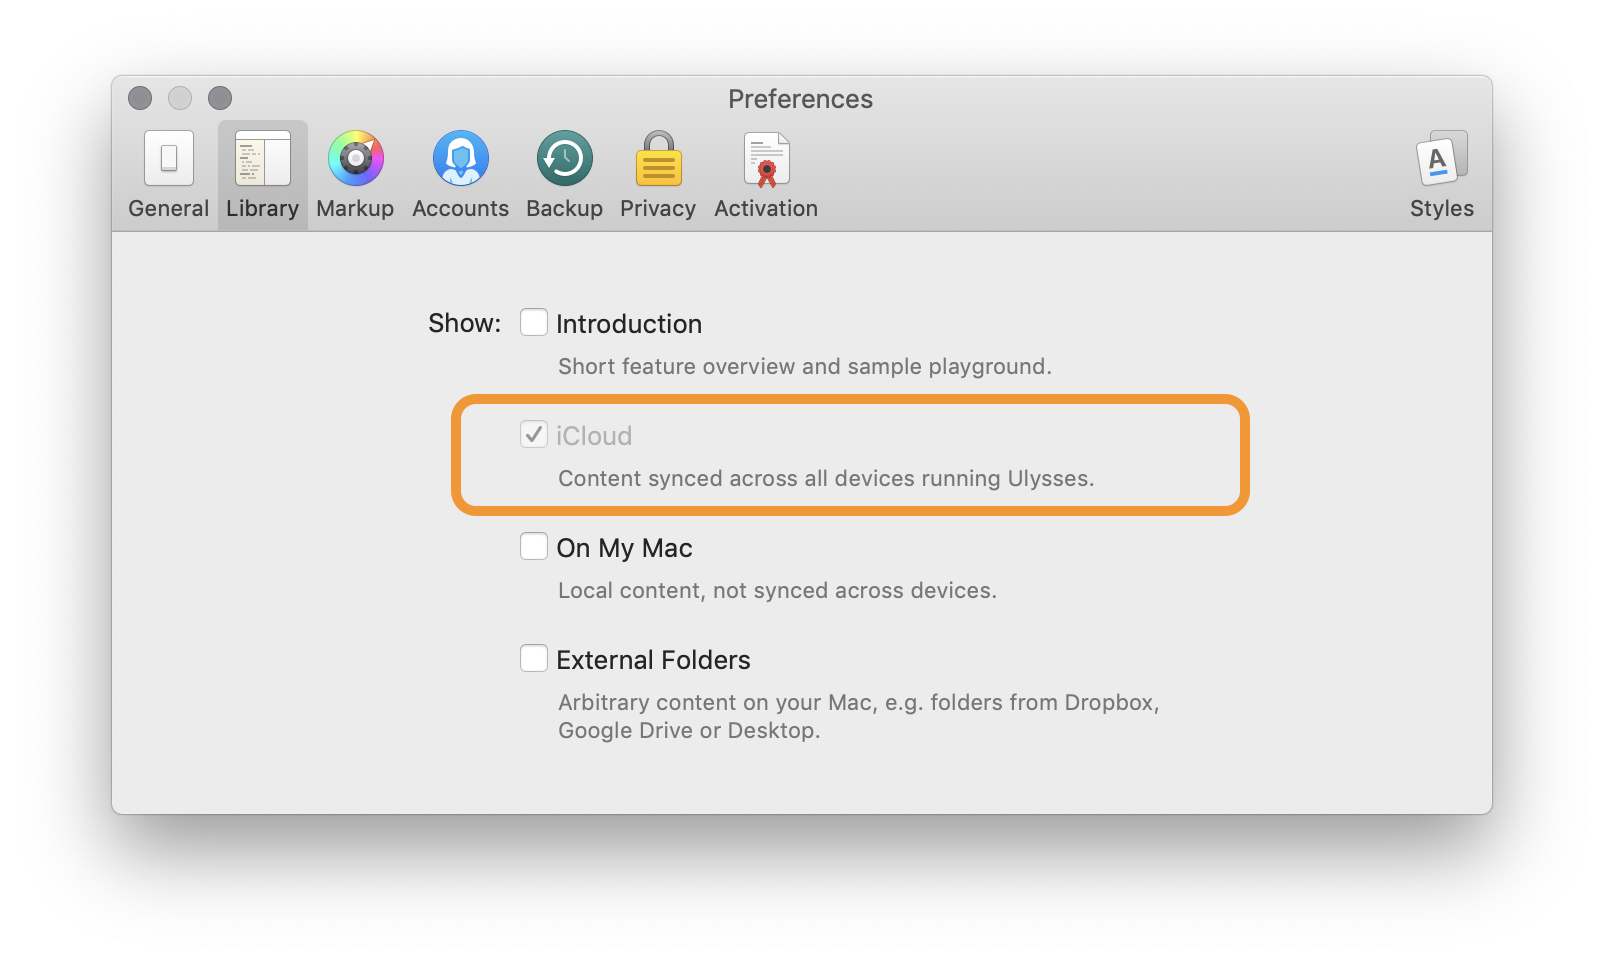 The preferences dialog of Ulysses, with the iCloud option checked